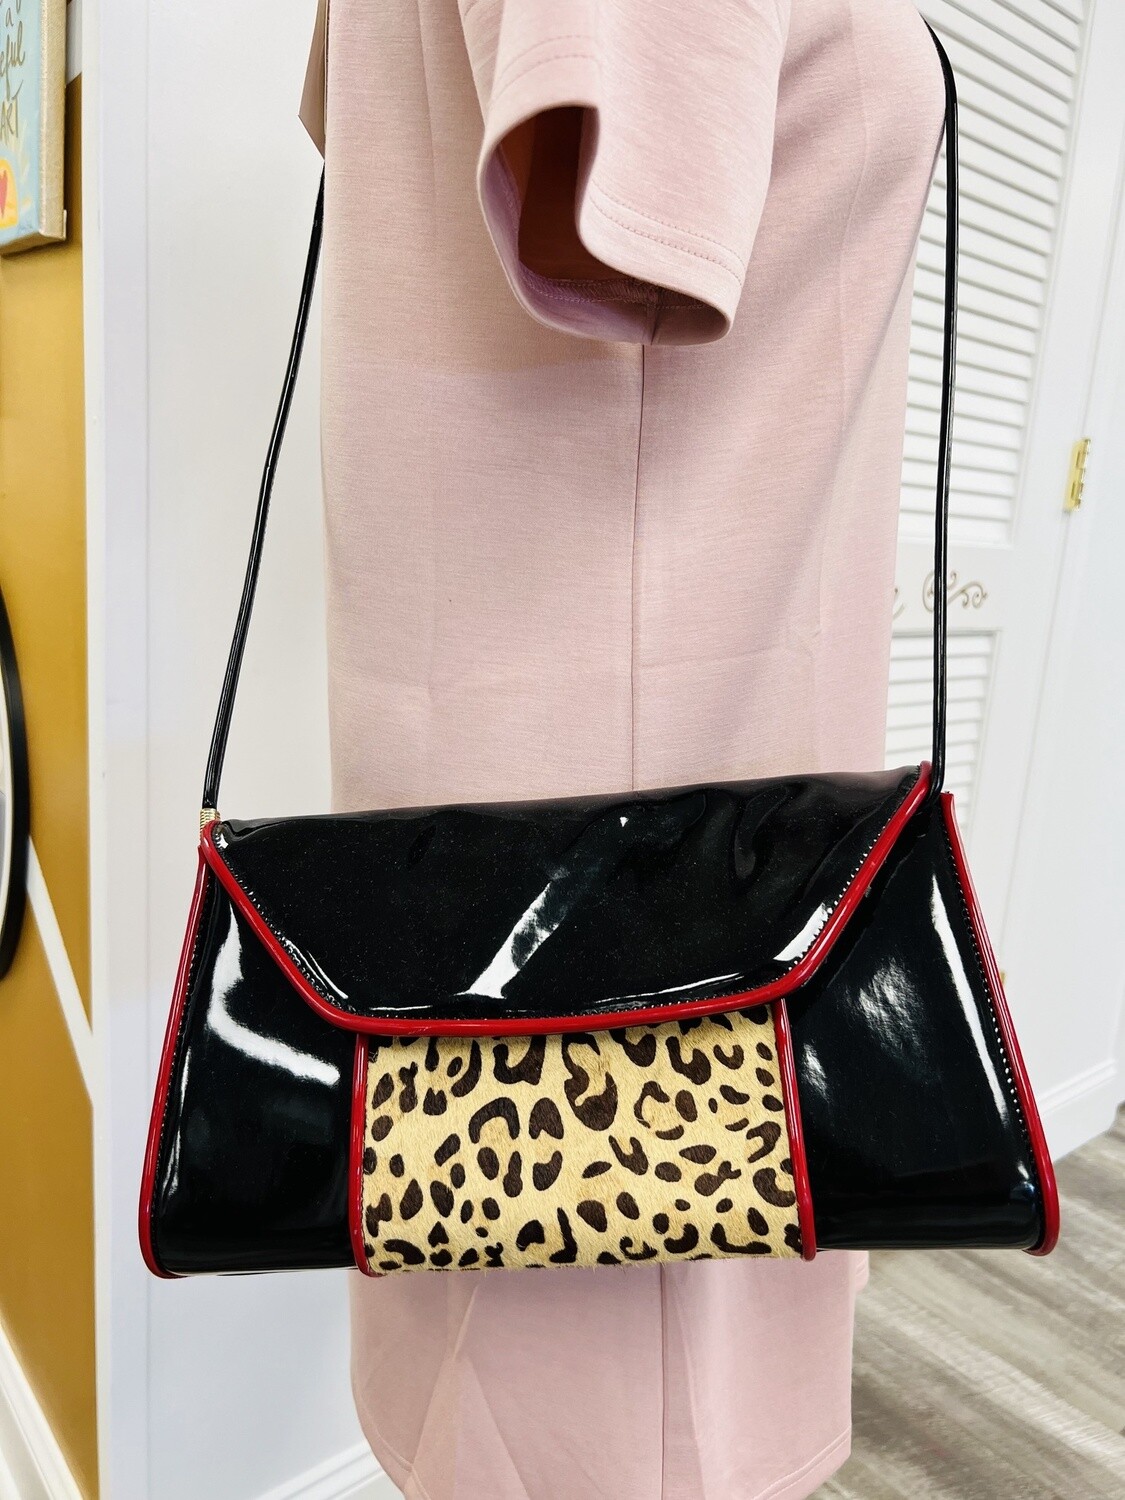 Black Shiny Cheetah Purse With Red Detail